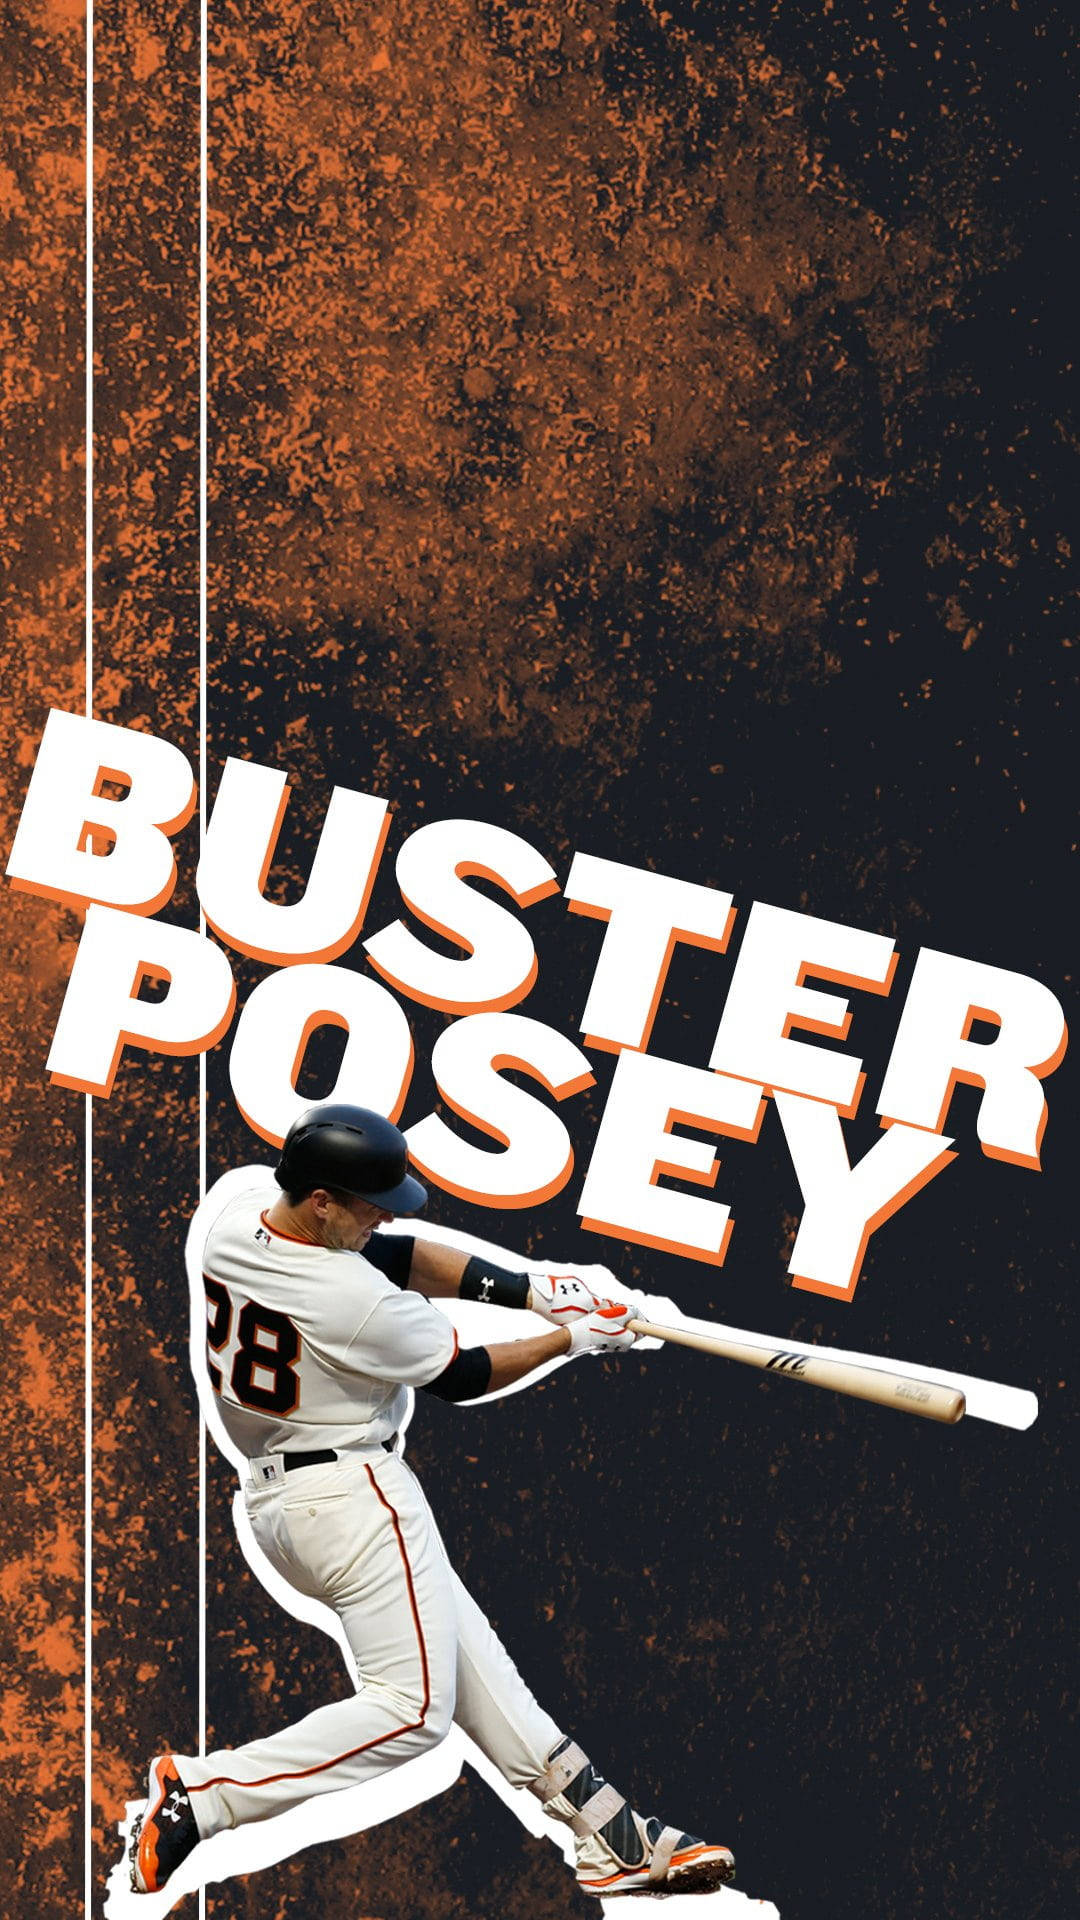 Buster Posey Extreme